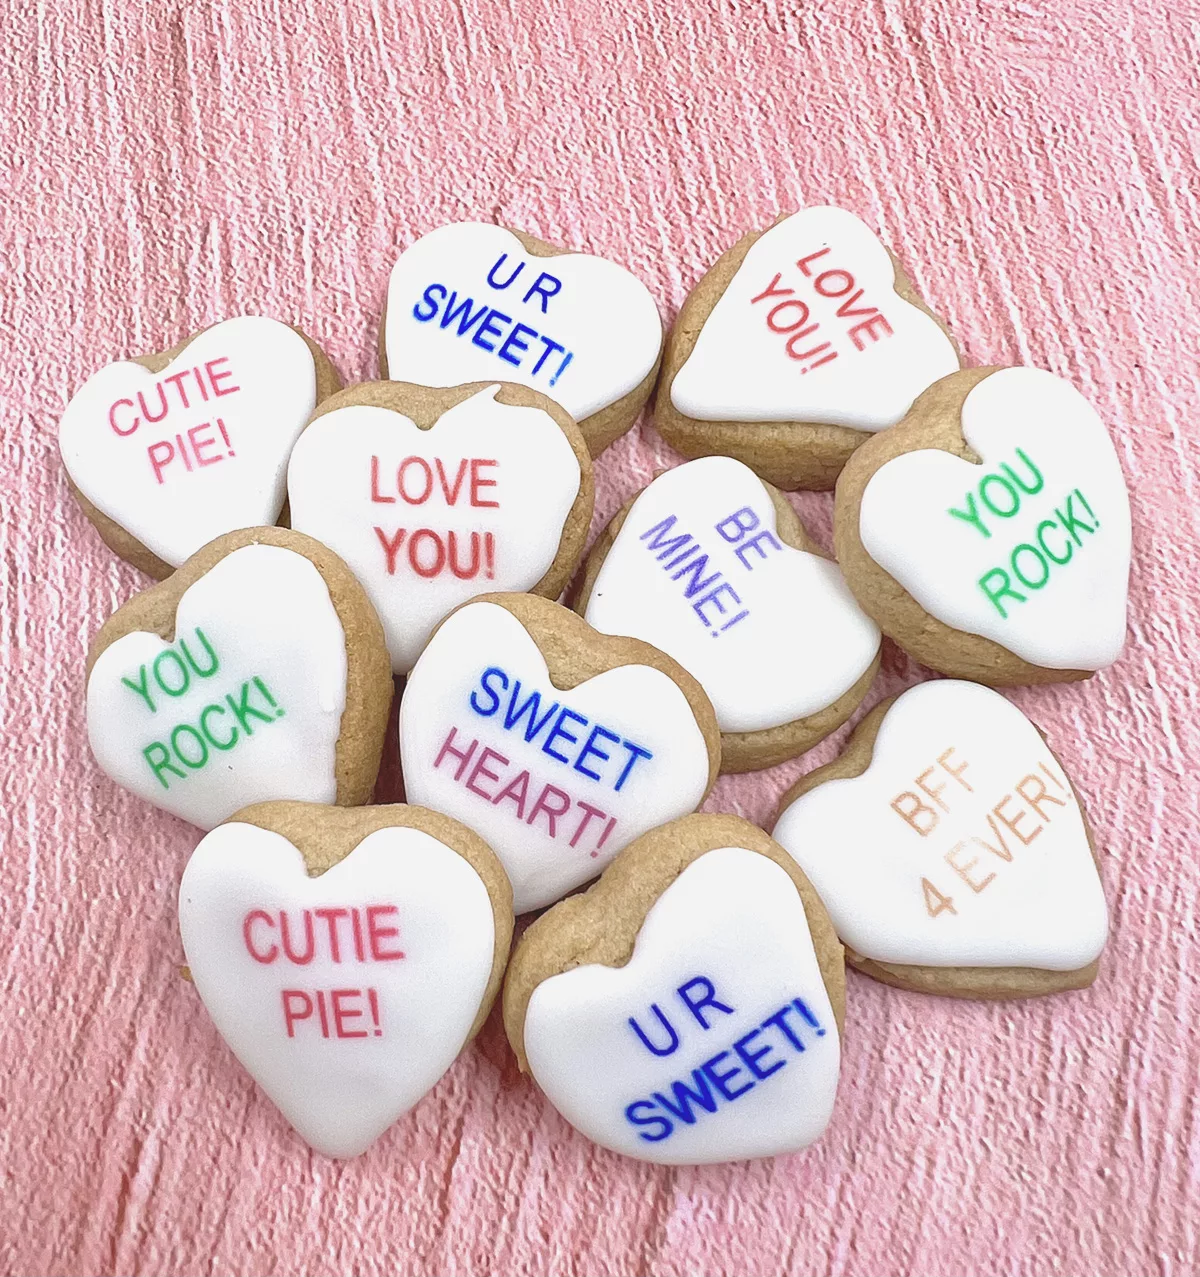 A batch of Valentine's Day conversation heart sugar cookies against a pink background.